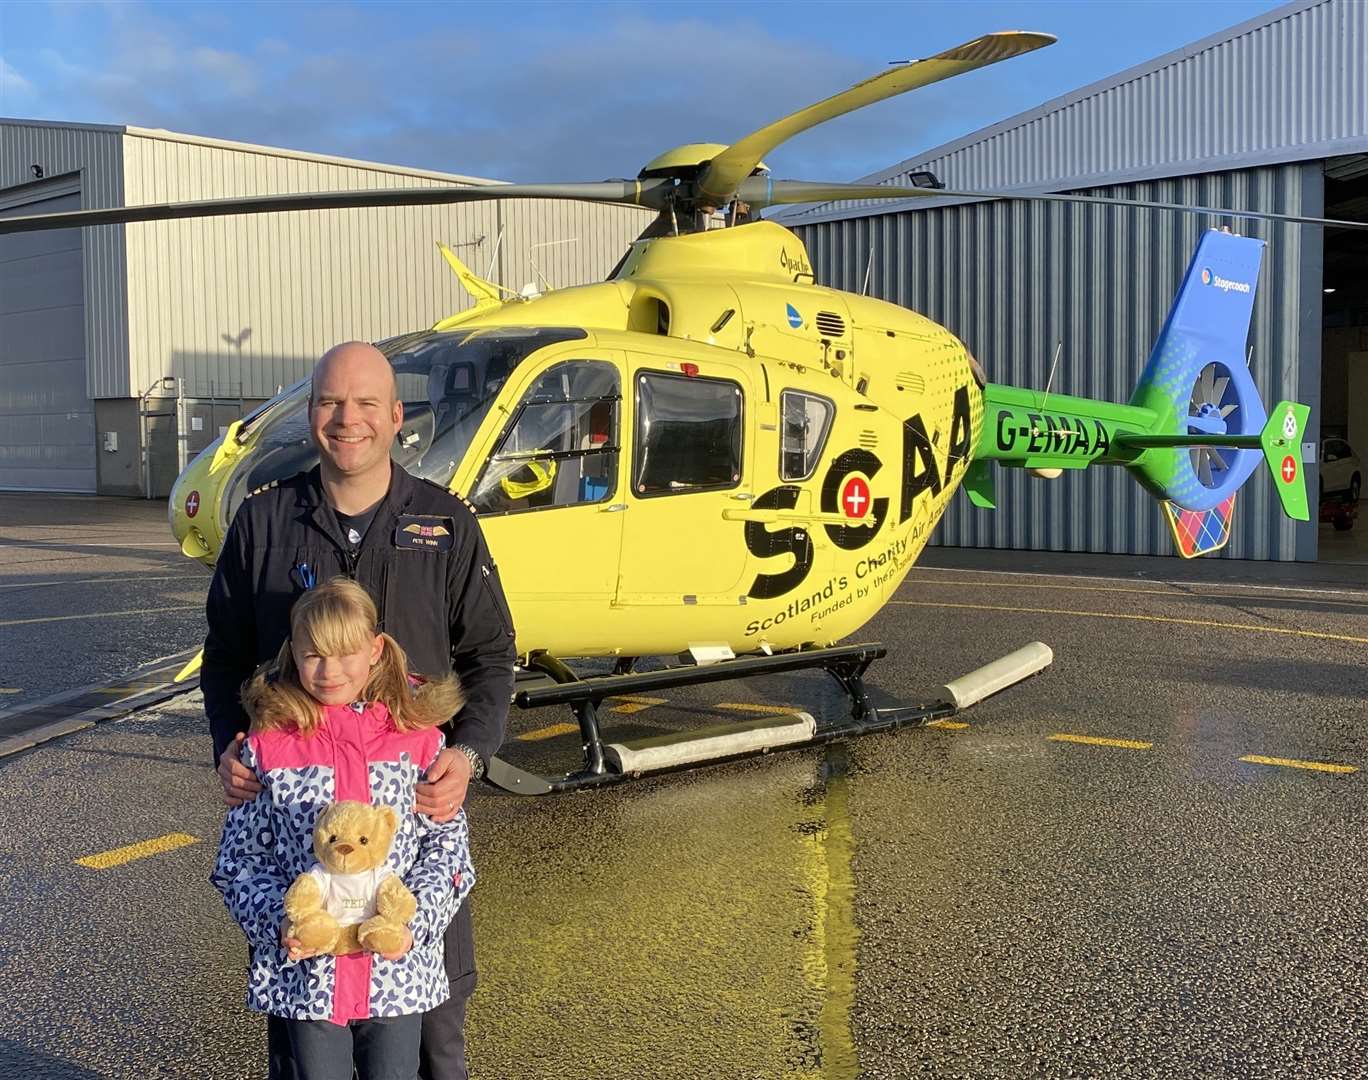 Arabella and teddy with Dad Captain Pete Winn at SCAA's Aberdeen base.